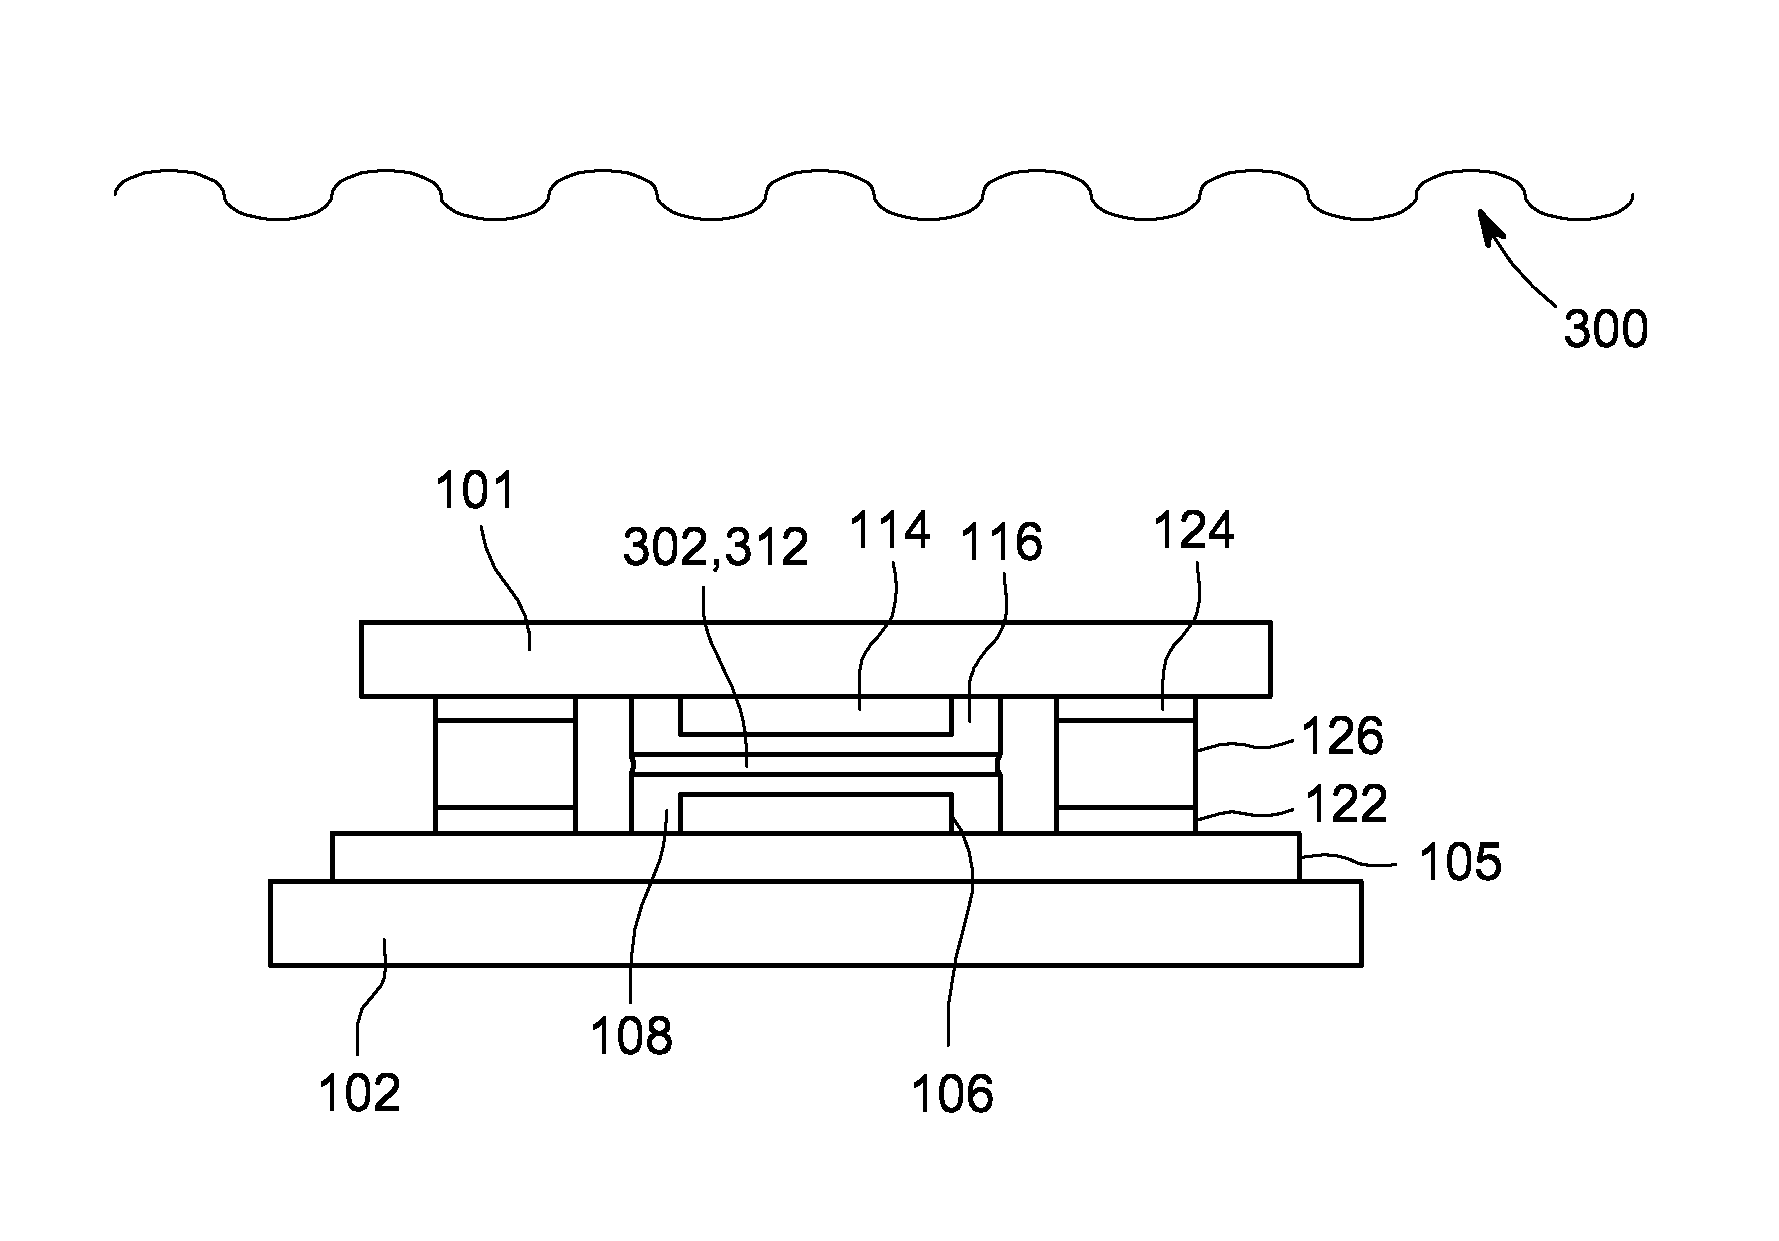 Electromagnetic field assisted self-assembly with formation of electrical contacts